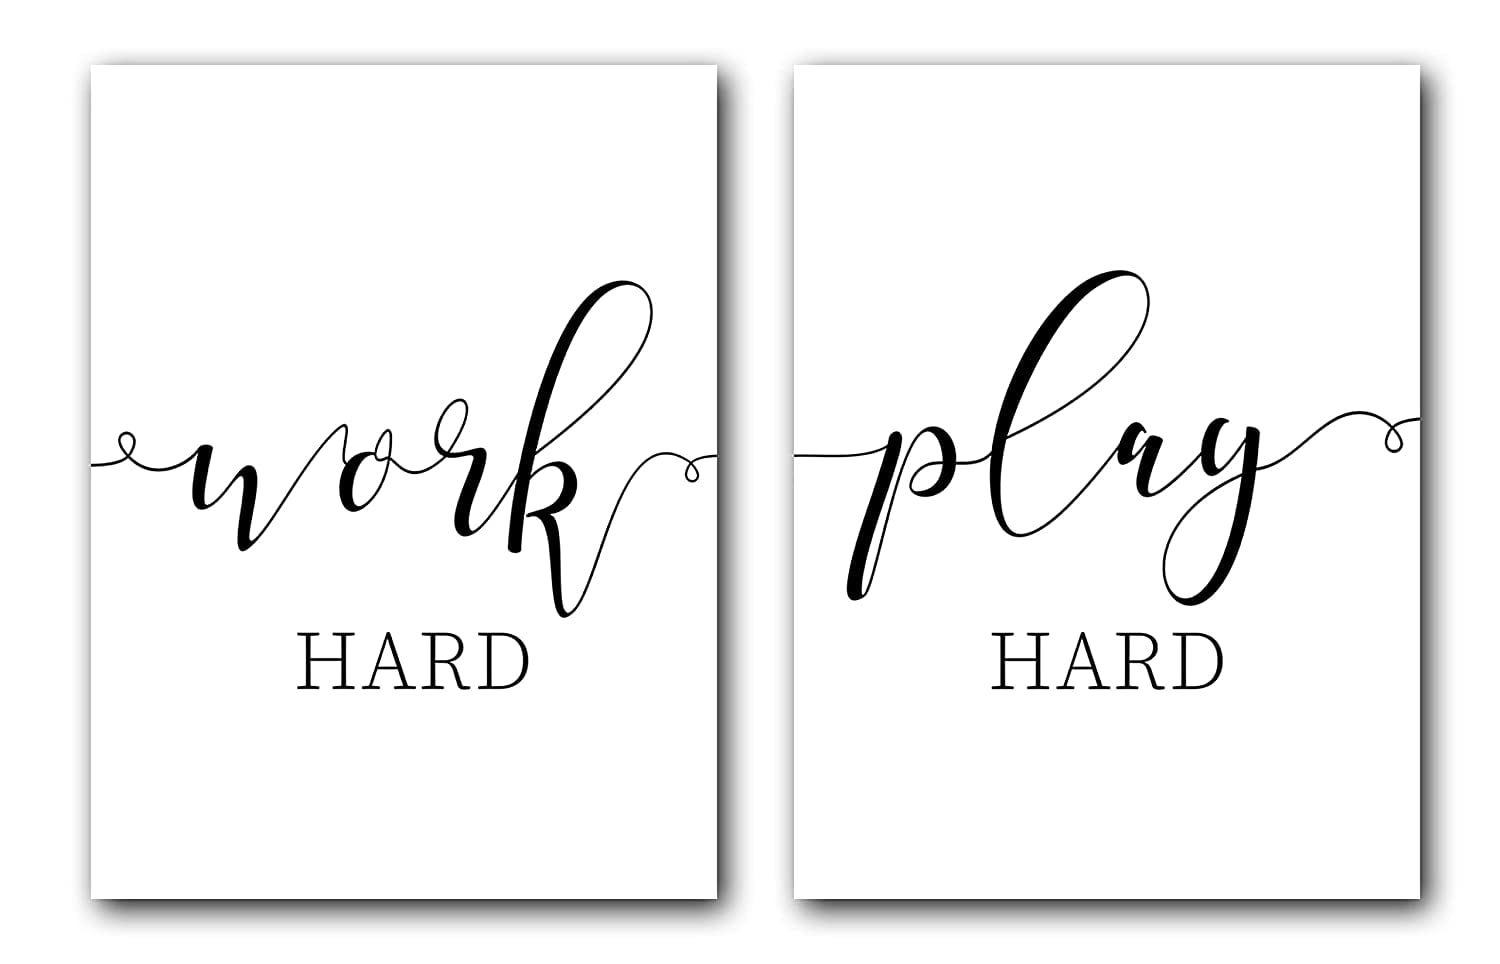 Digital Work Hard Play Hard Quote Poster I  Digital Printing Product I Premium High Quality I Wall Art I Home Decor I Inspired Poster